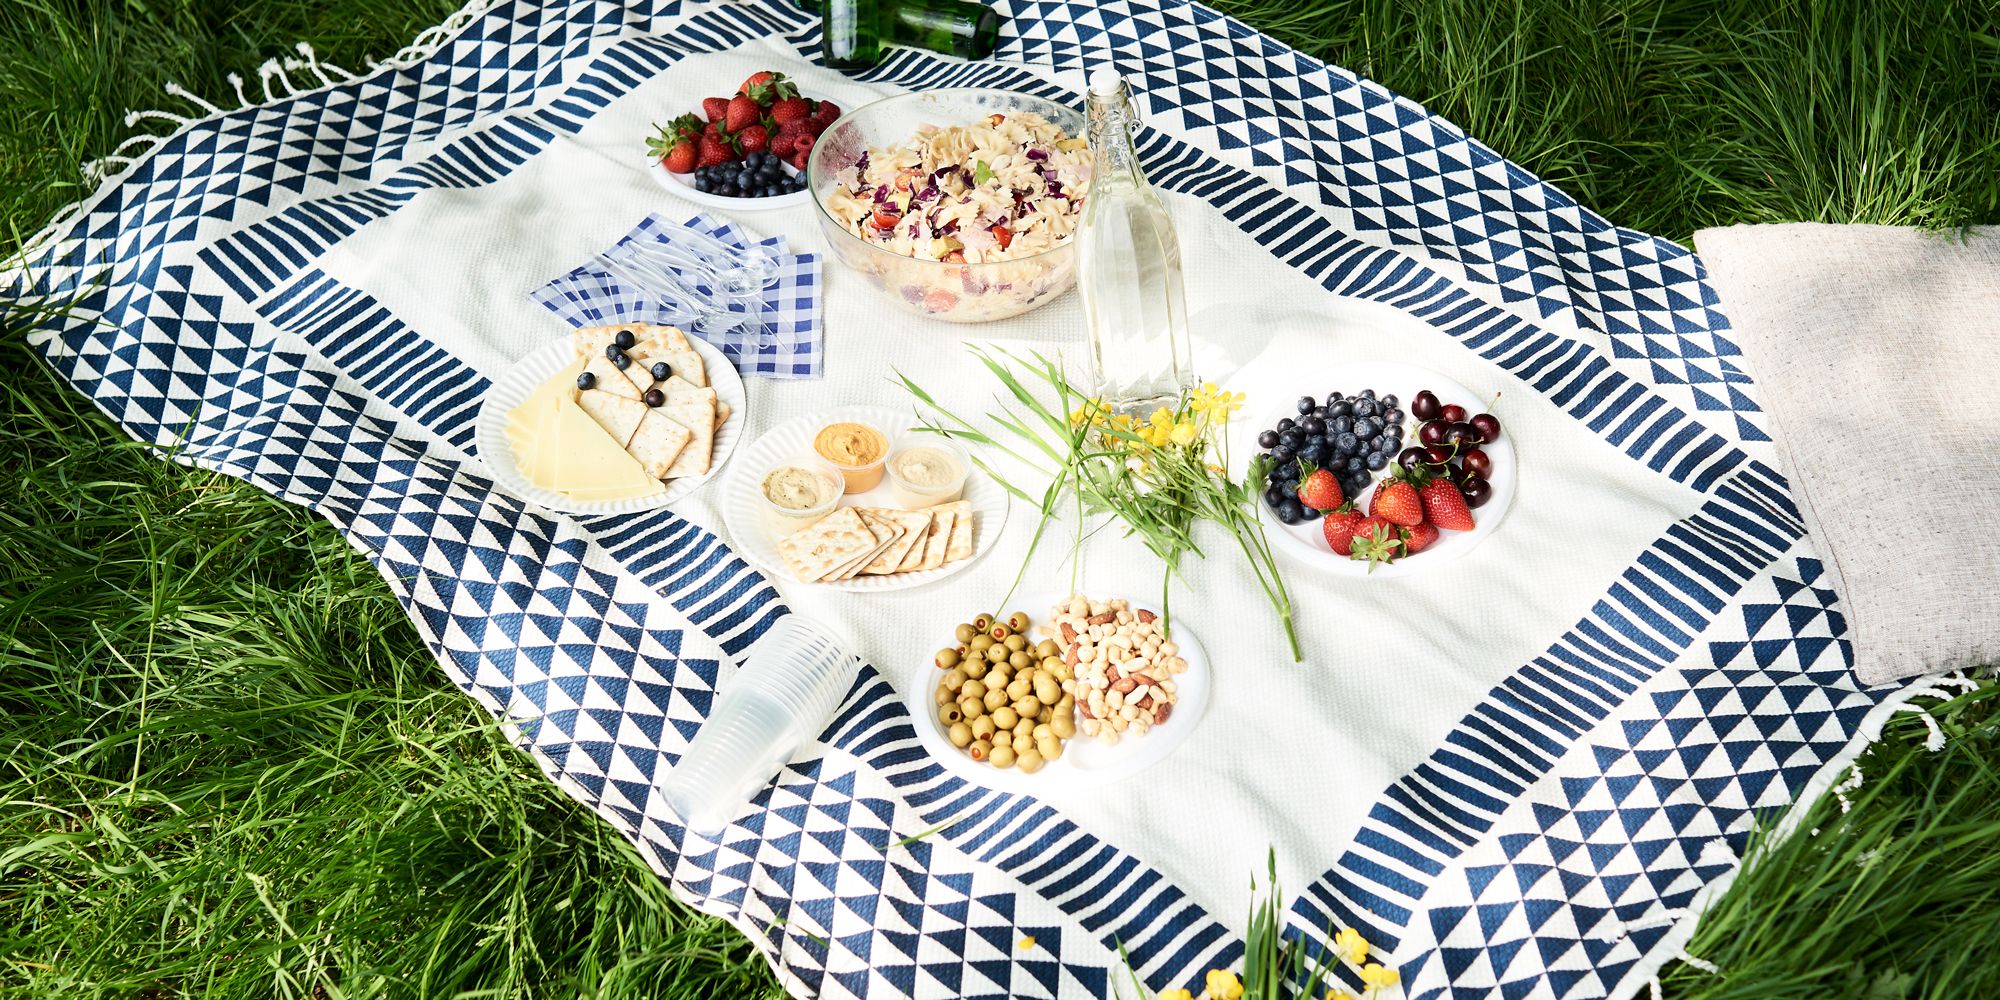 outdoor blanket with picnic foods on grass